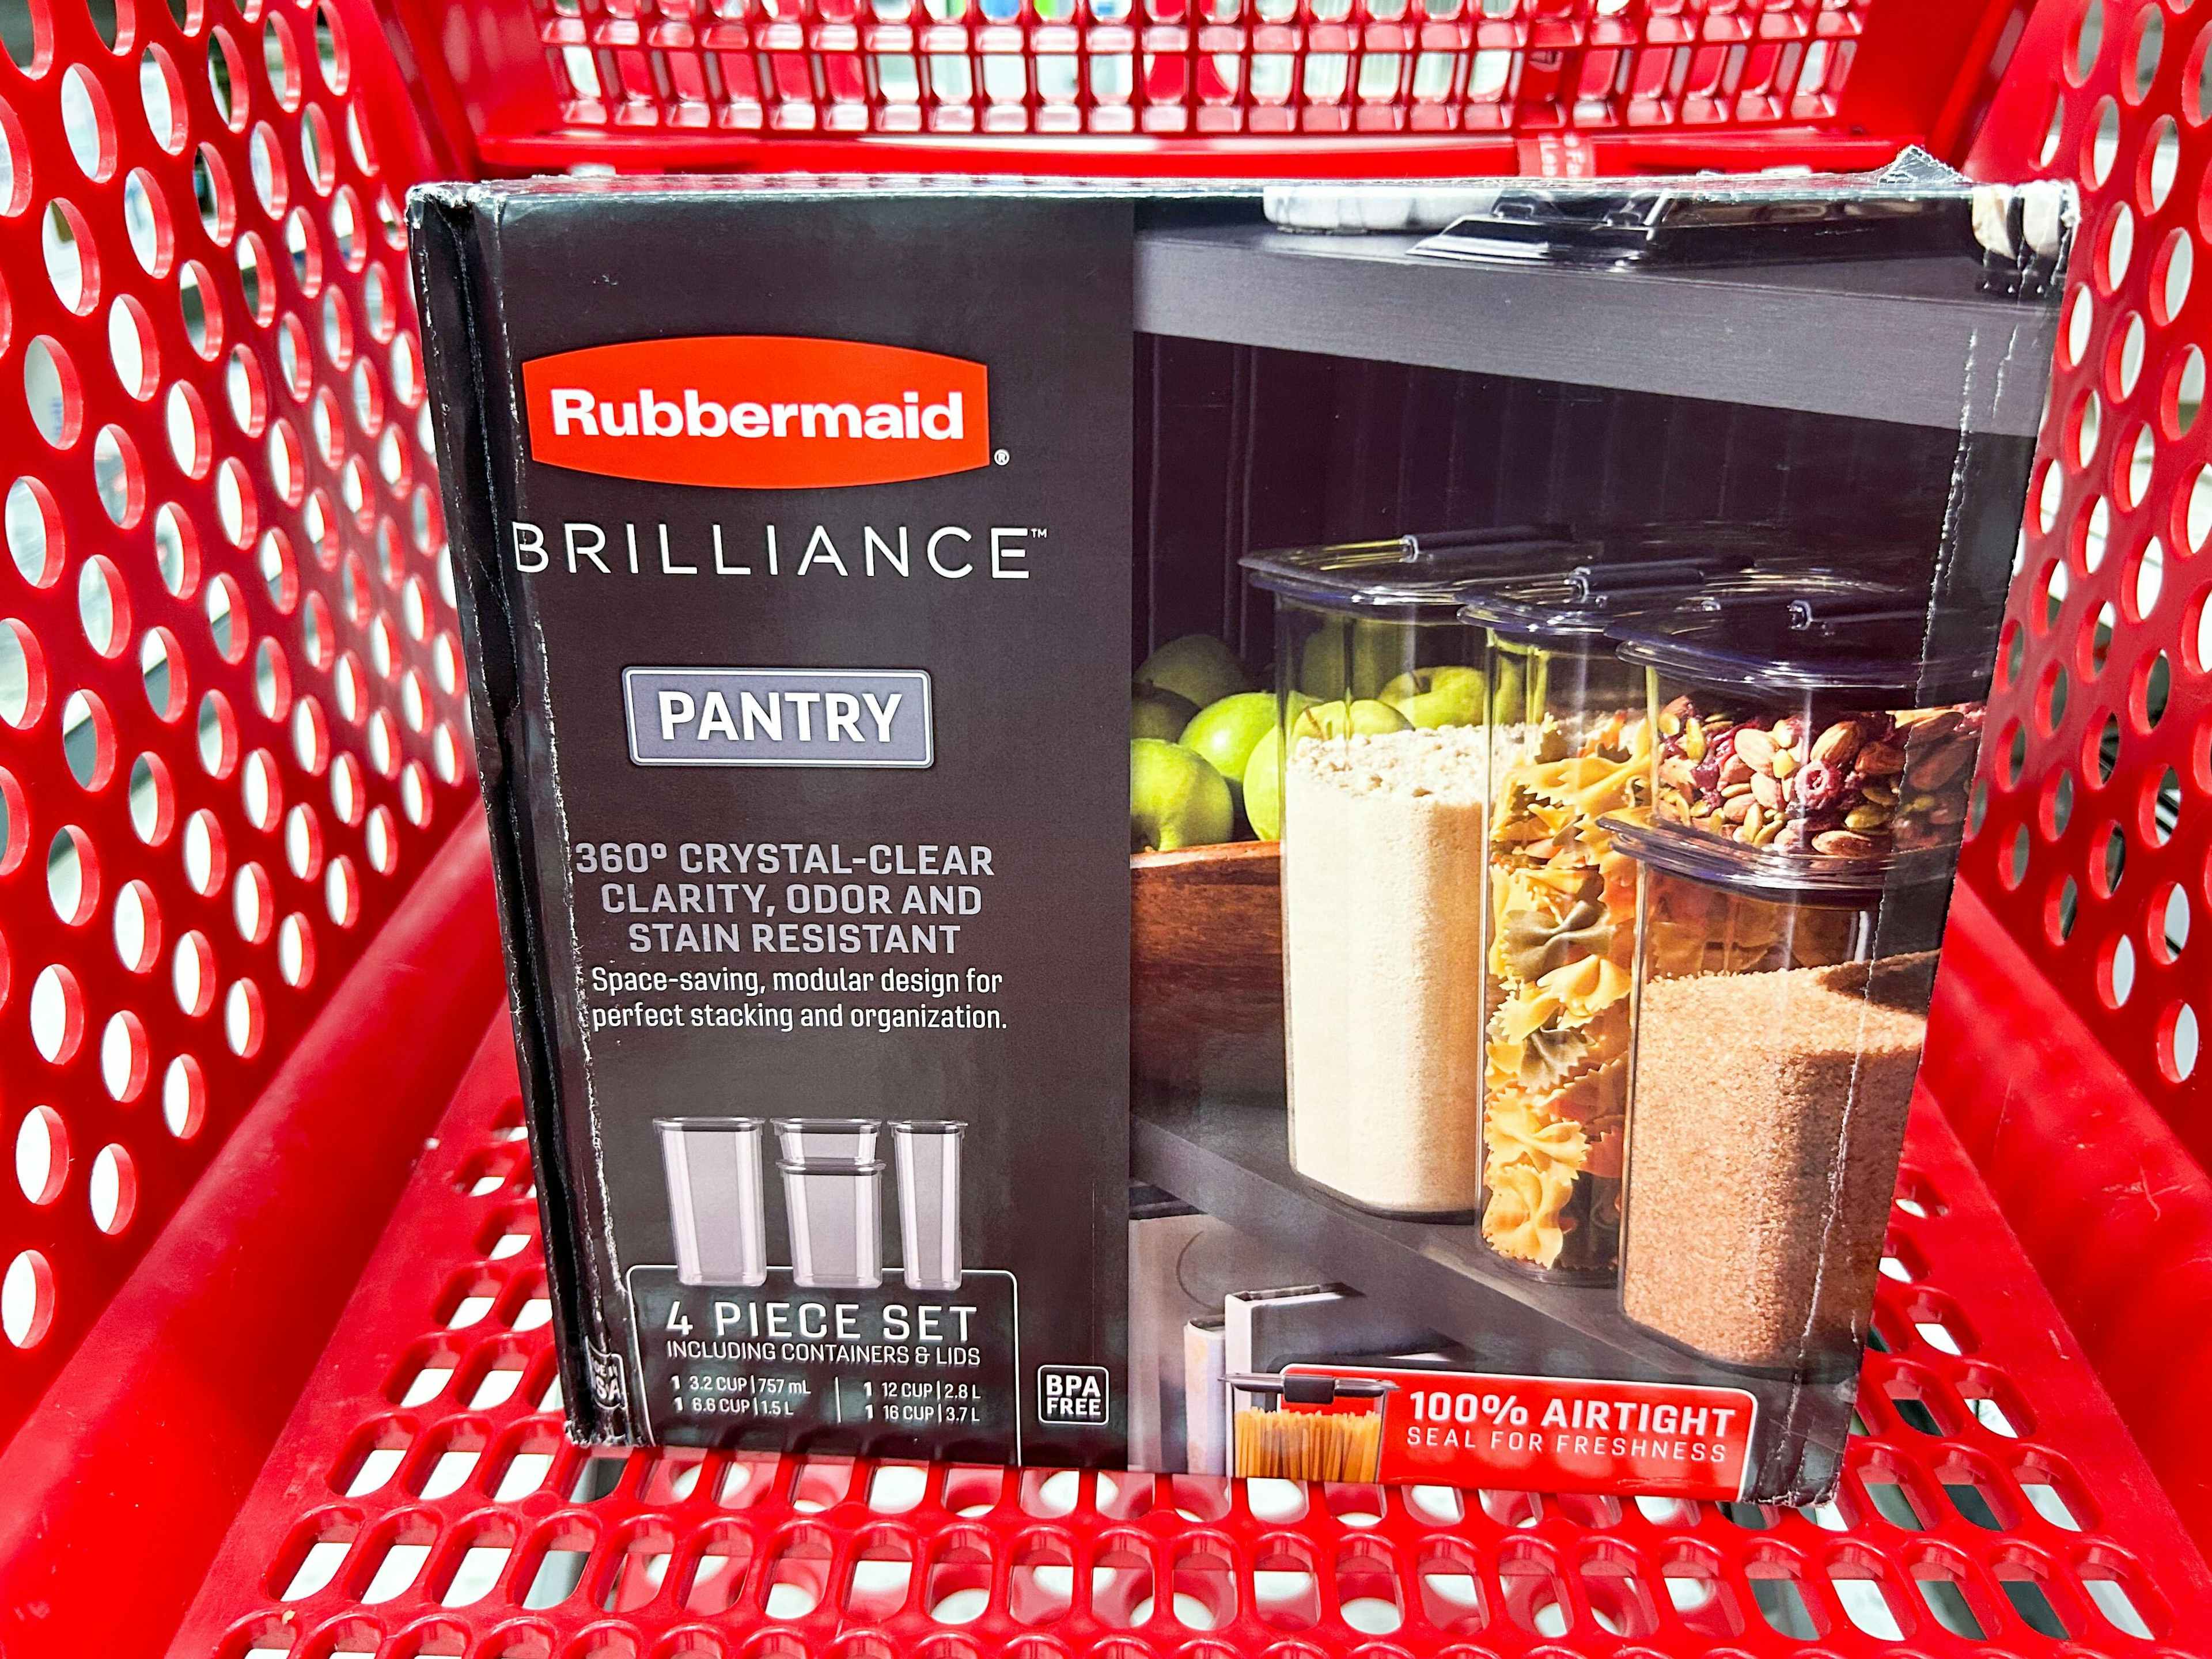 rubbermaid-brilliance-container-set-target-2022 (4)